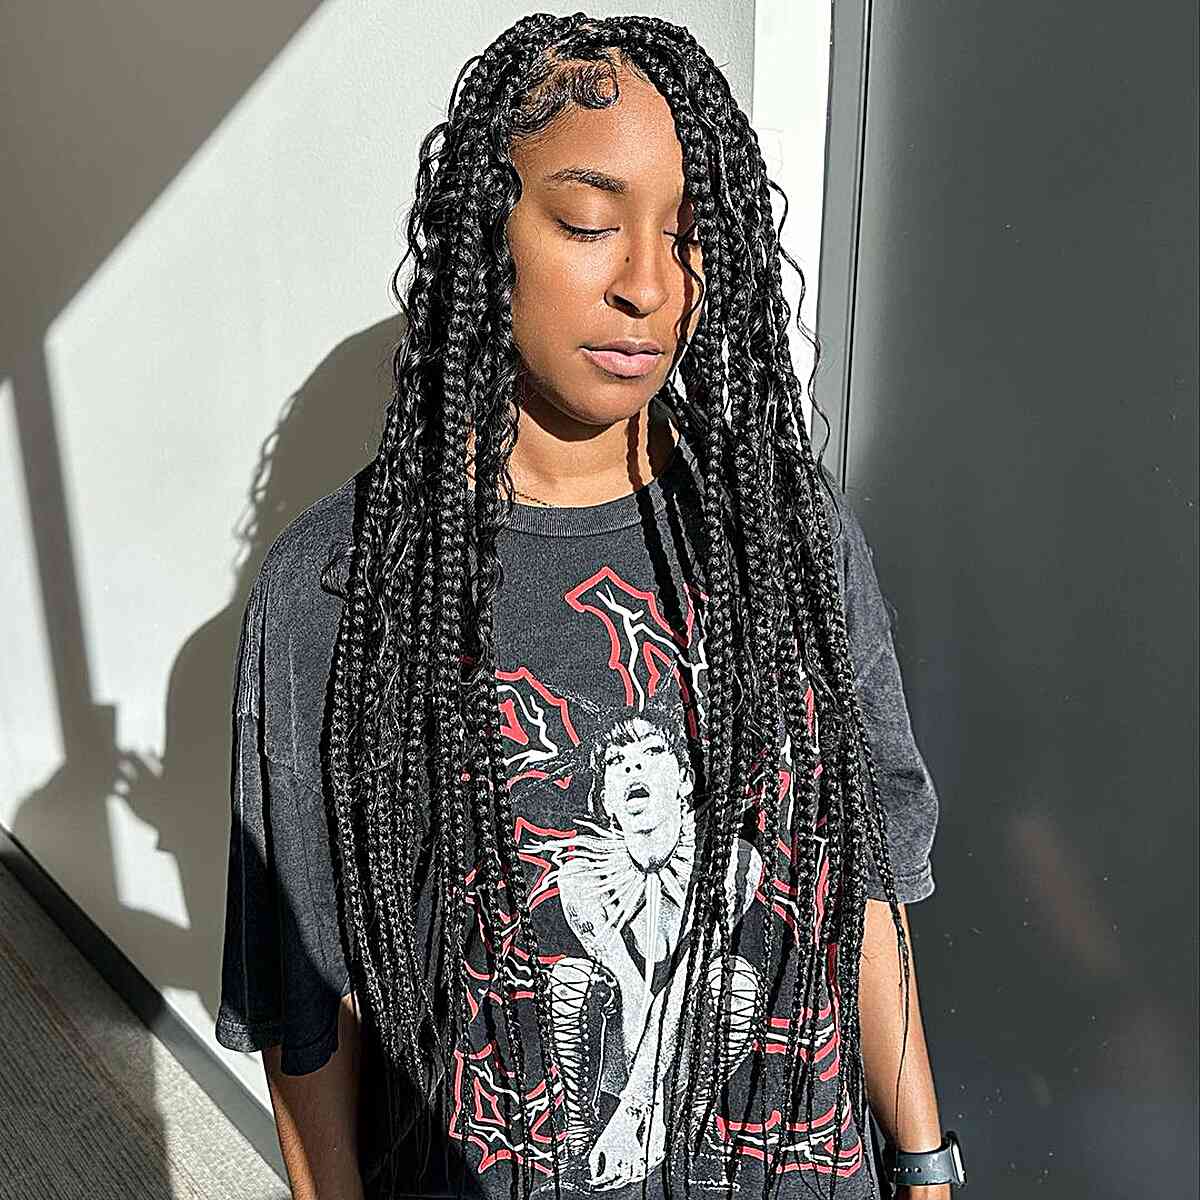 40 Long Box Braids Braiders Say Are Trending Right Now